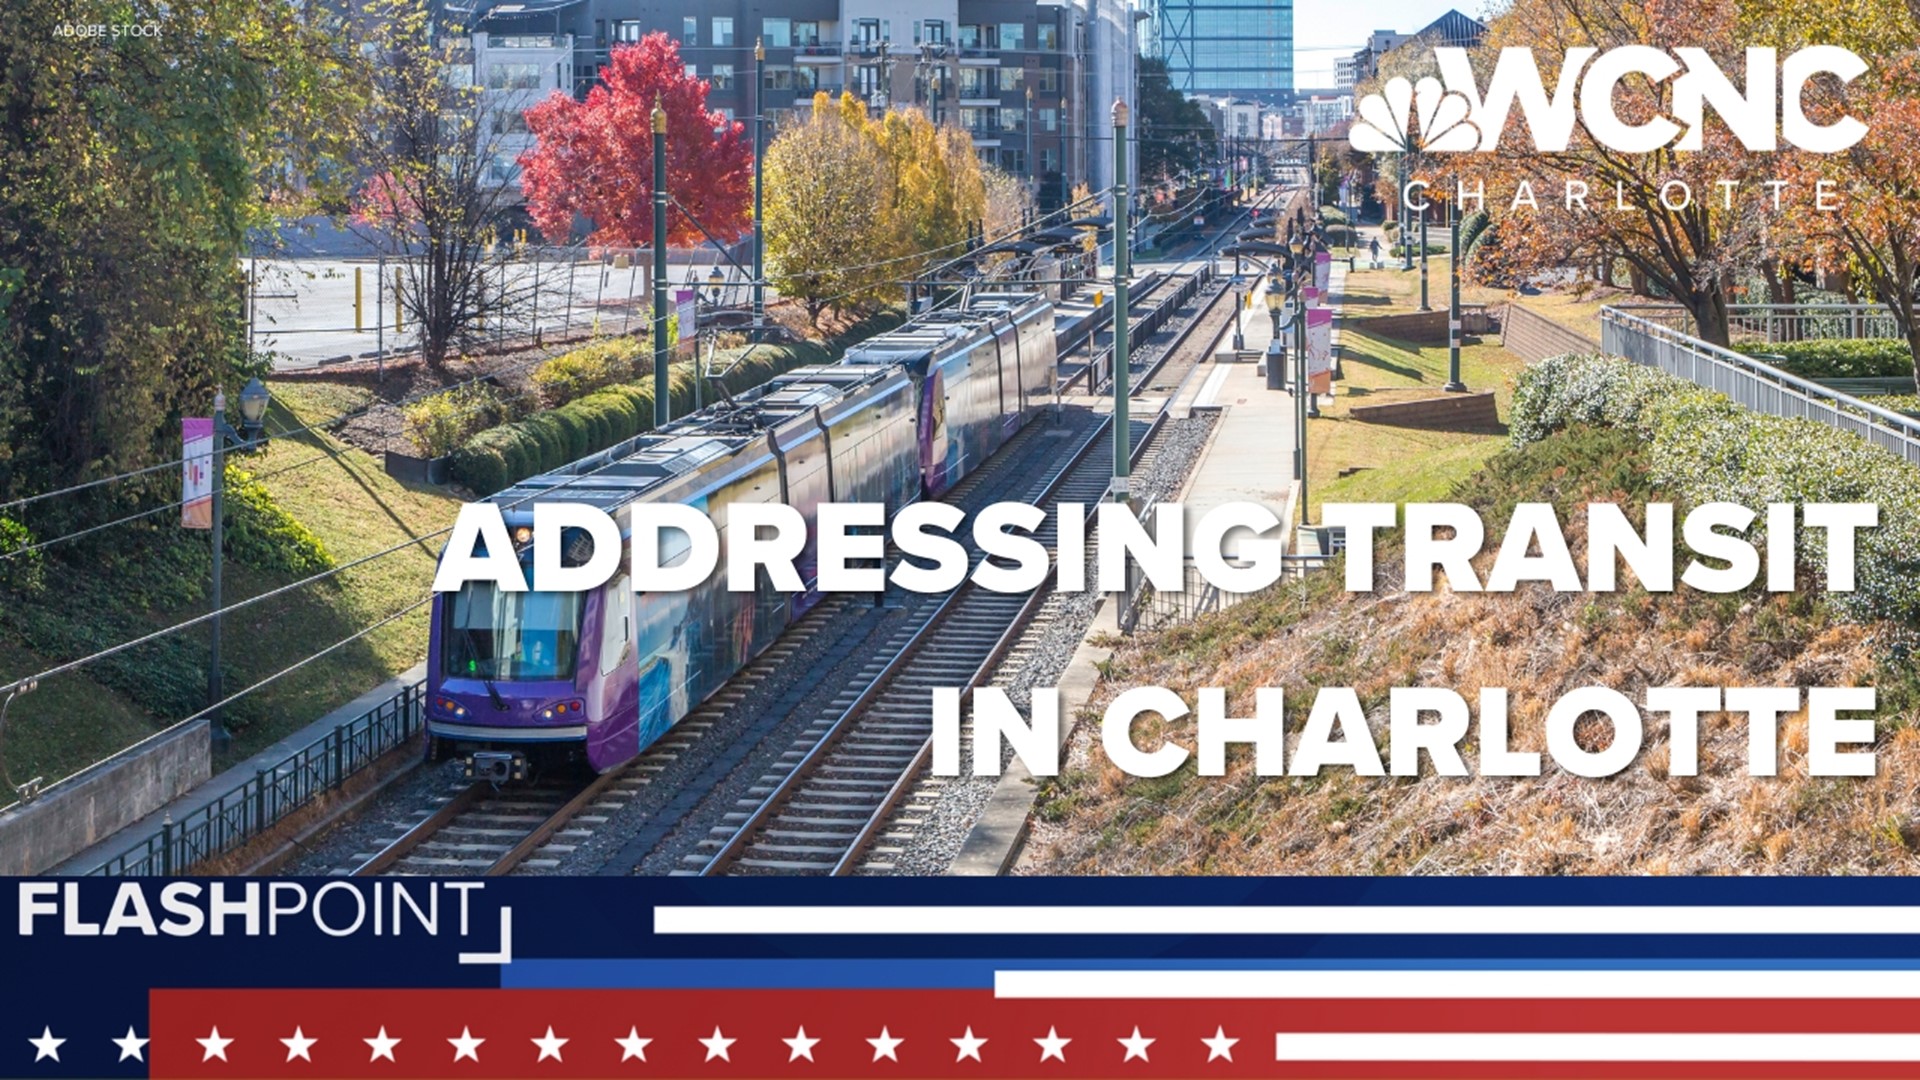 In recent years, council tackled a number of controversial issues including the Unified Development Ordinance, the Charlotte 2040 comprehensive plan and more.